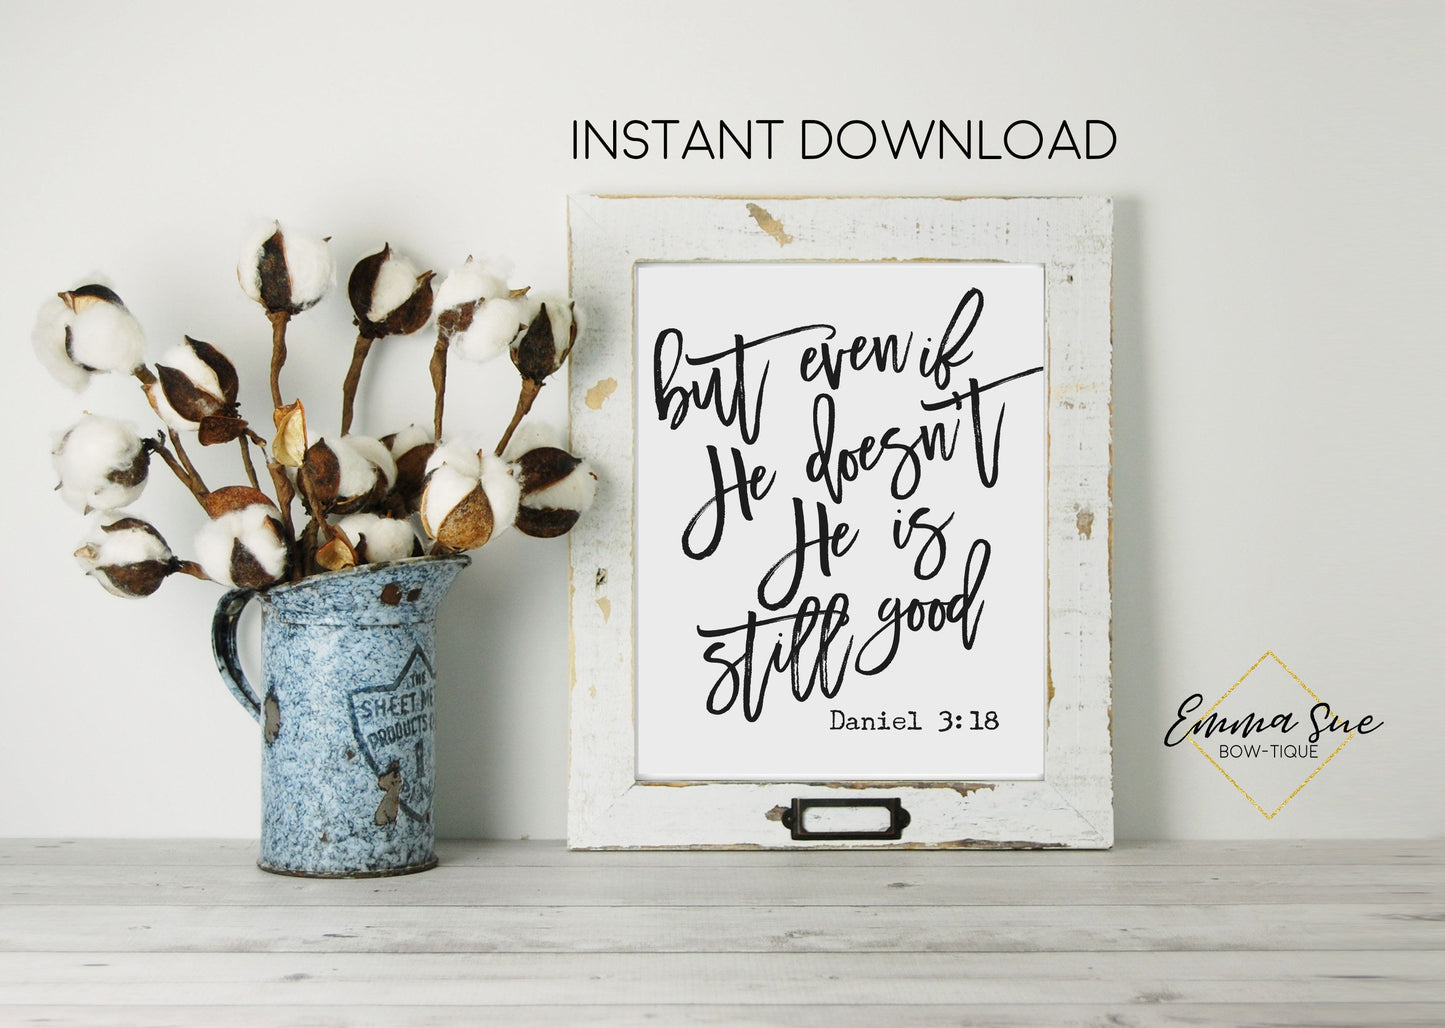 But even if He doesn't He is still good Daniel 3:18 Bible Scripture Wall Art Printable